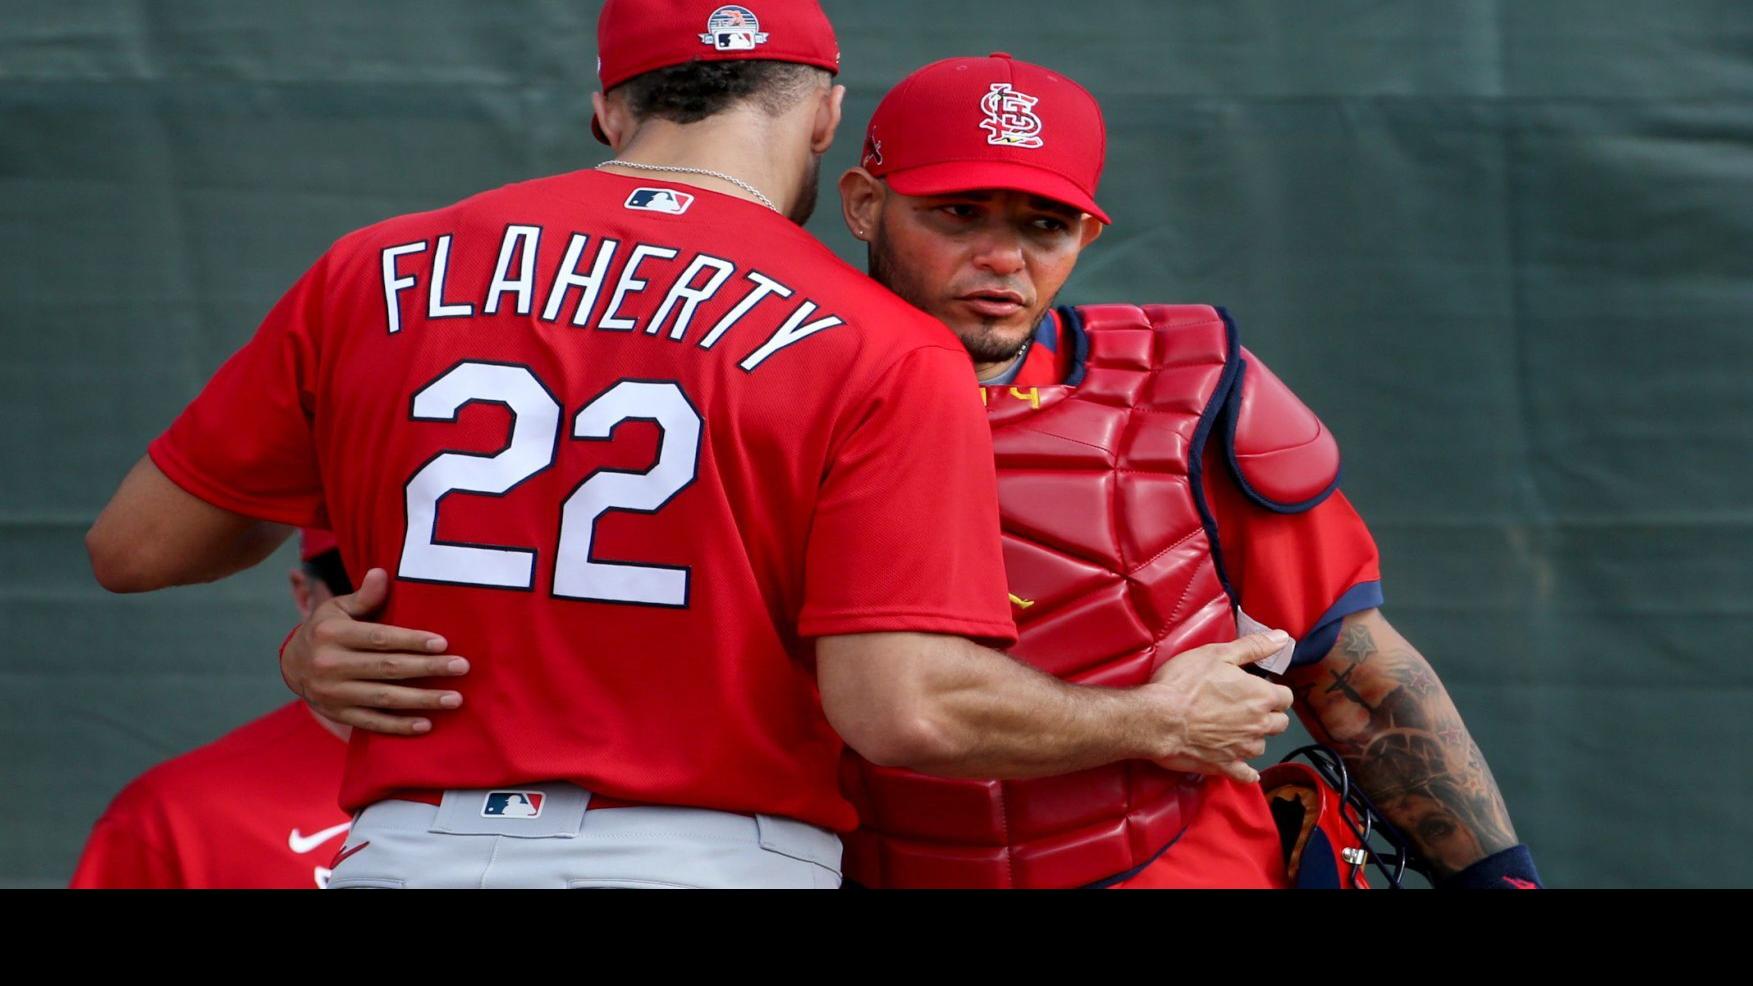 Union will challenge any delay to free agency for Cardinals Flaherty & Hicks due to MLB's canceled games